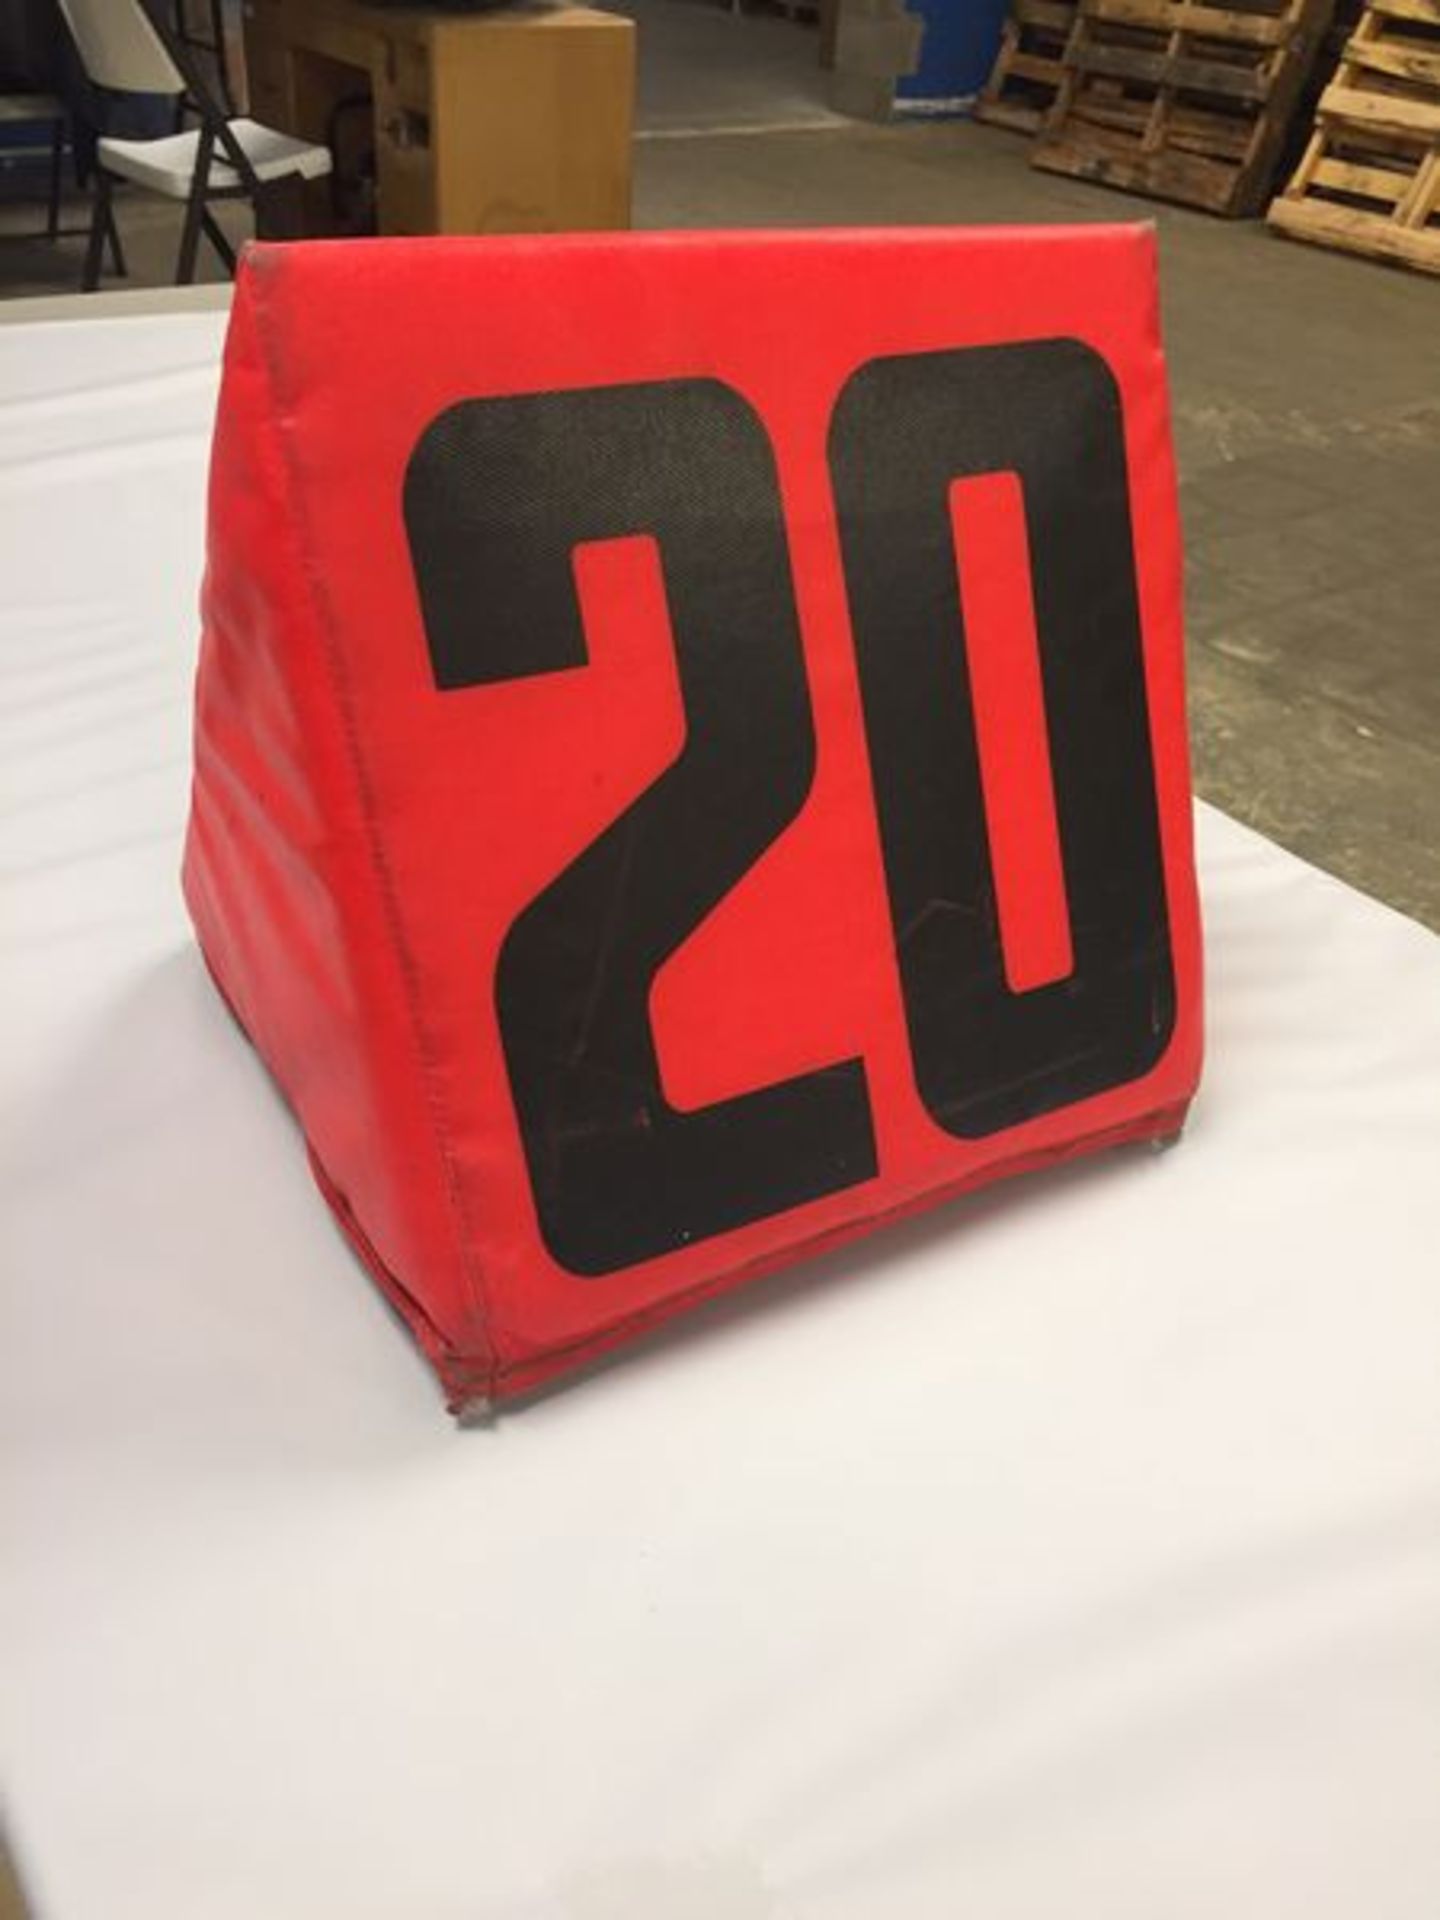 20 yard"" Sideline Marker / Game-Used / This item includes Georgia Dome Authentication Tag